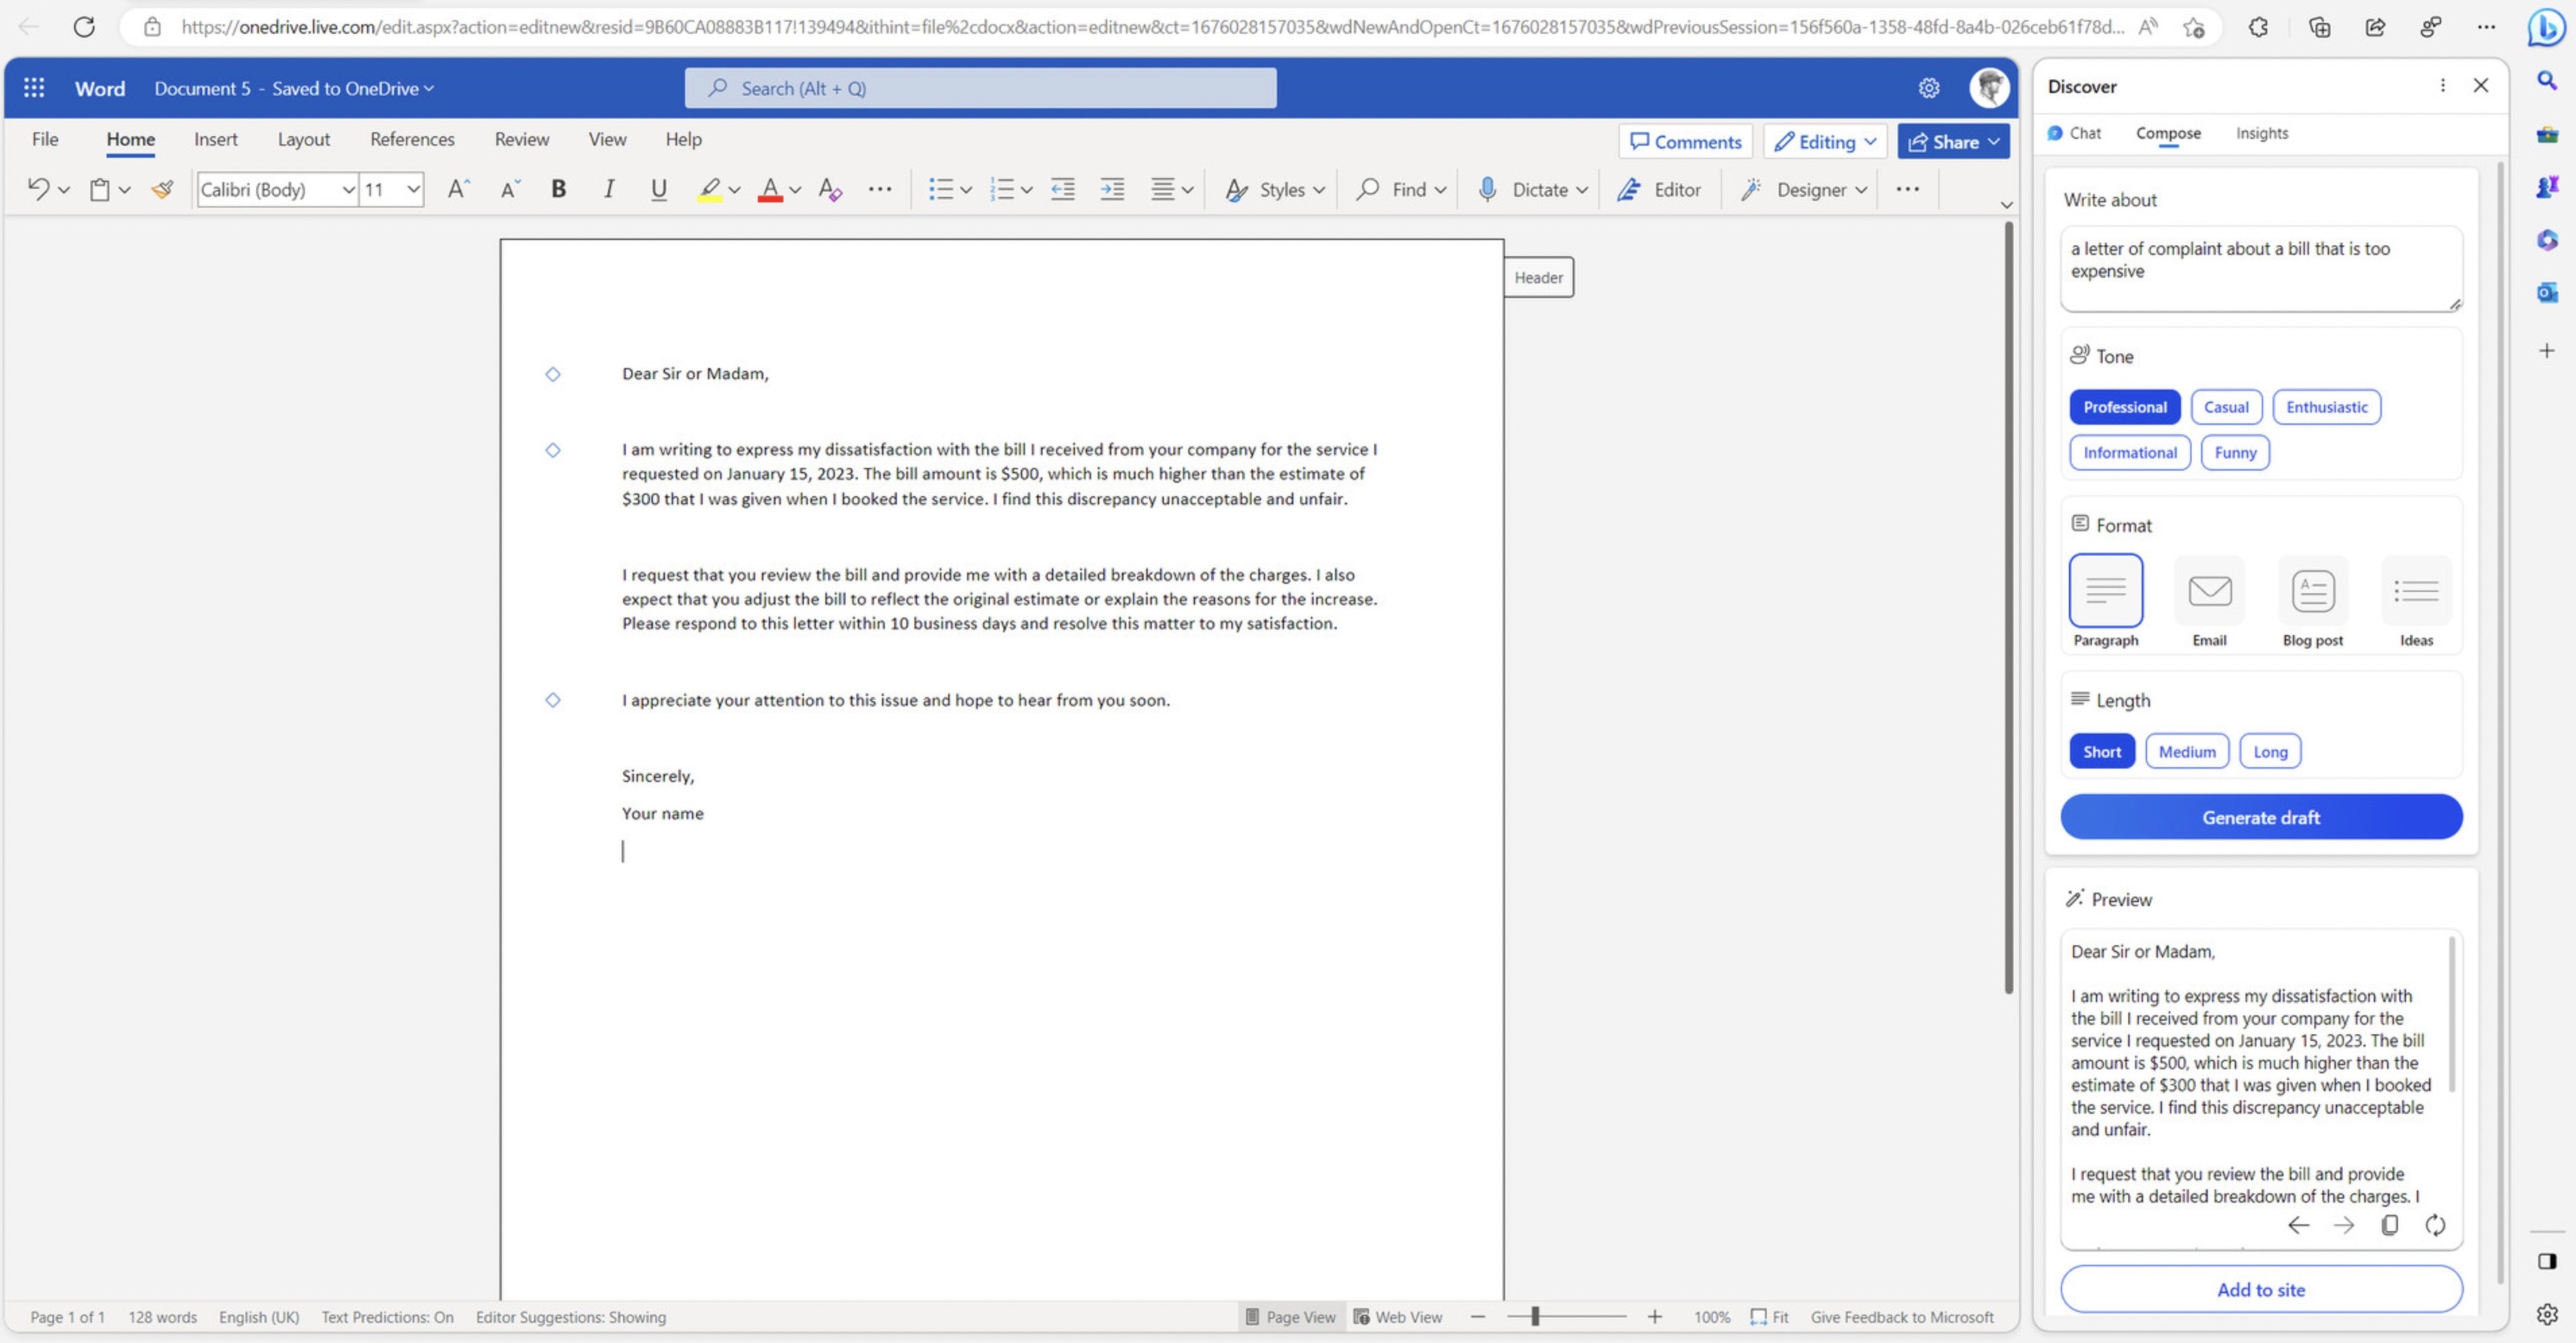  microsoft     office word outlook 